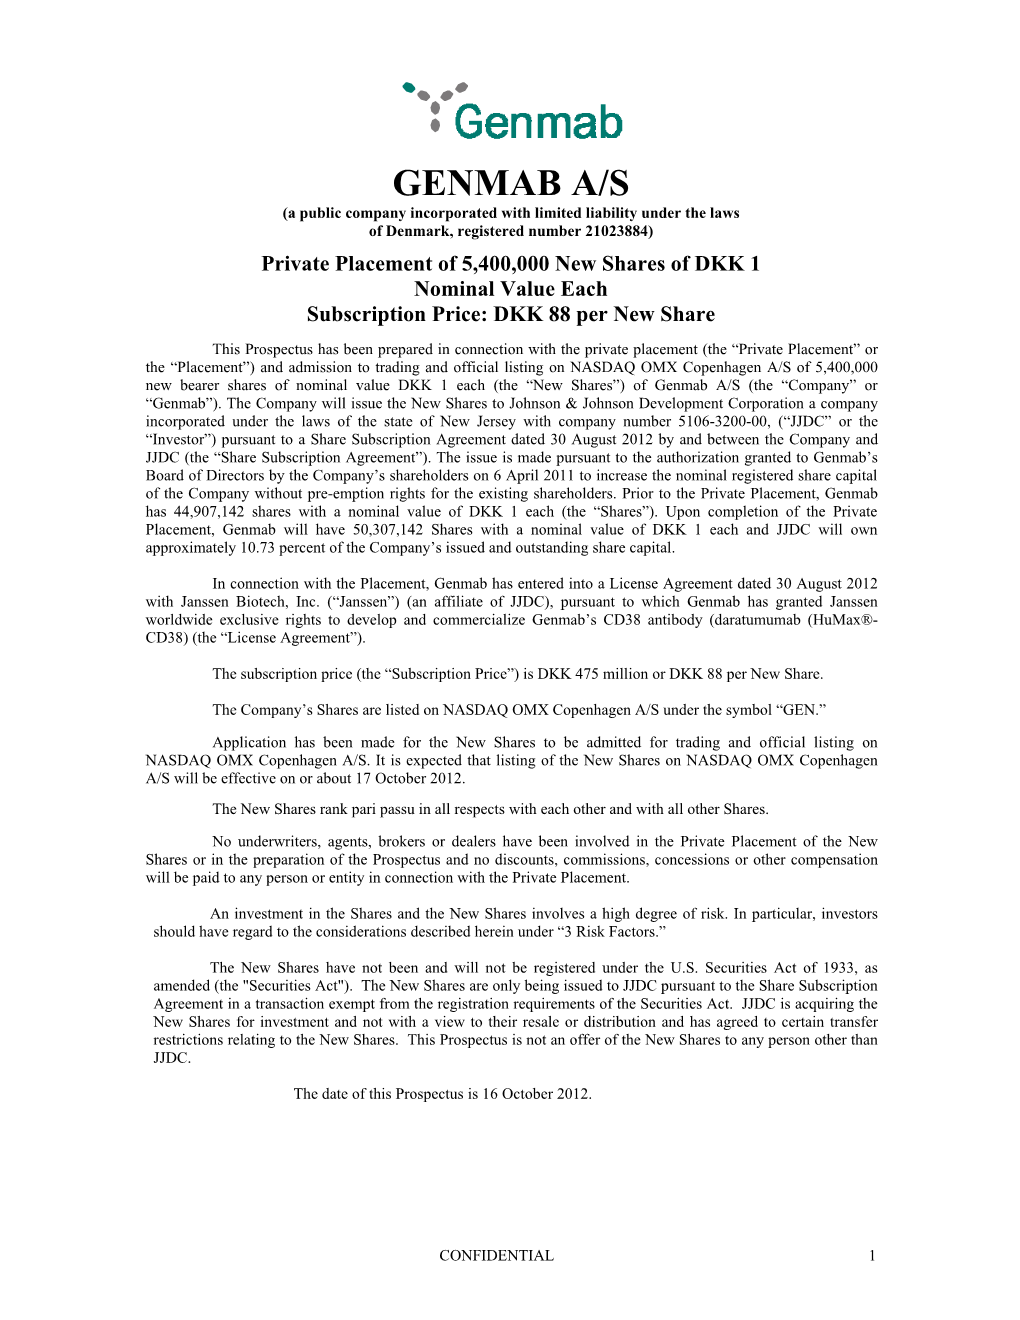 GENMAB A/S (A Public Company Incorporated with Limited Liability Under the Laws of Denmark, Registered Number 21023884)